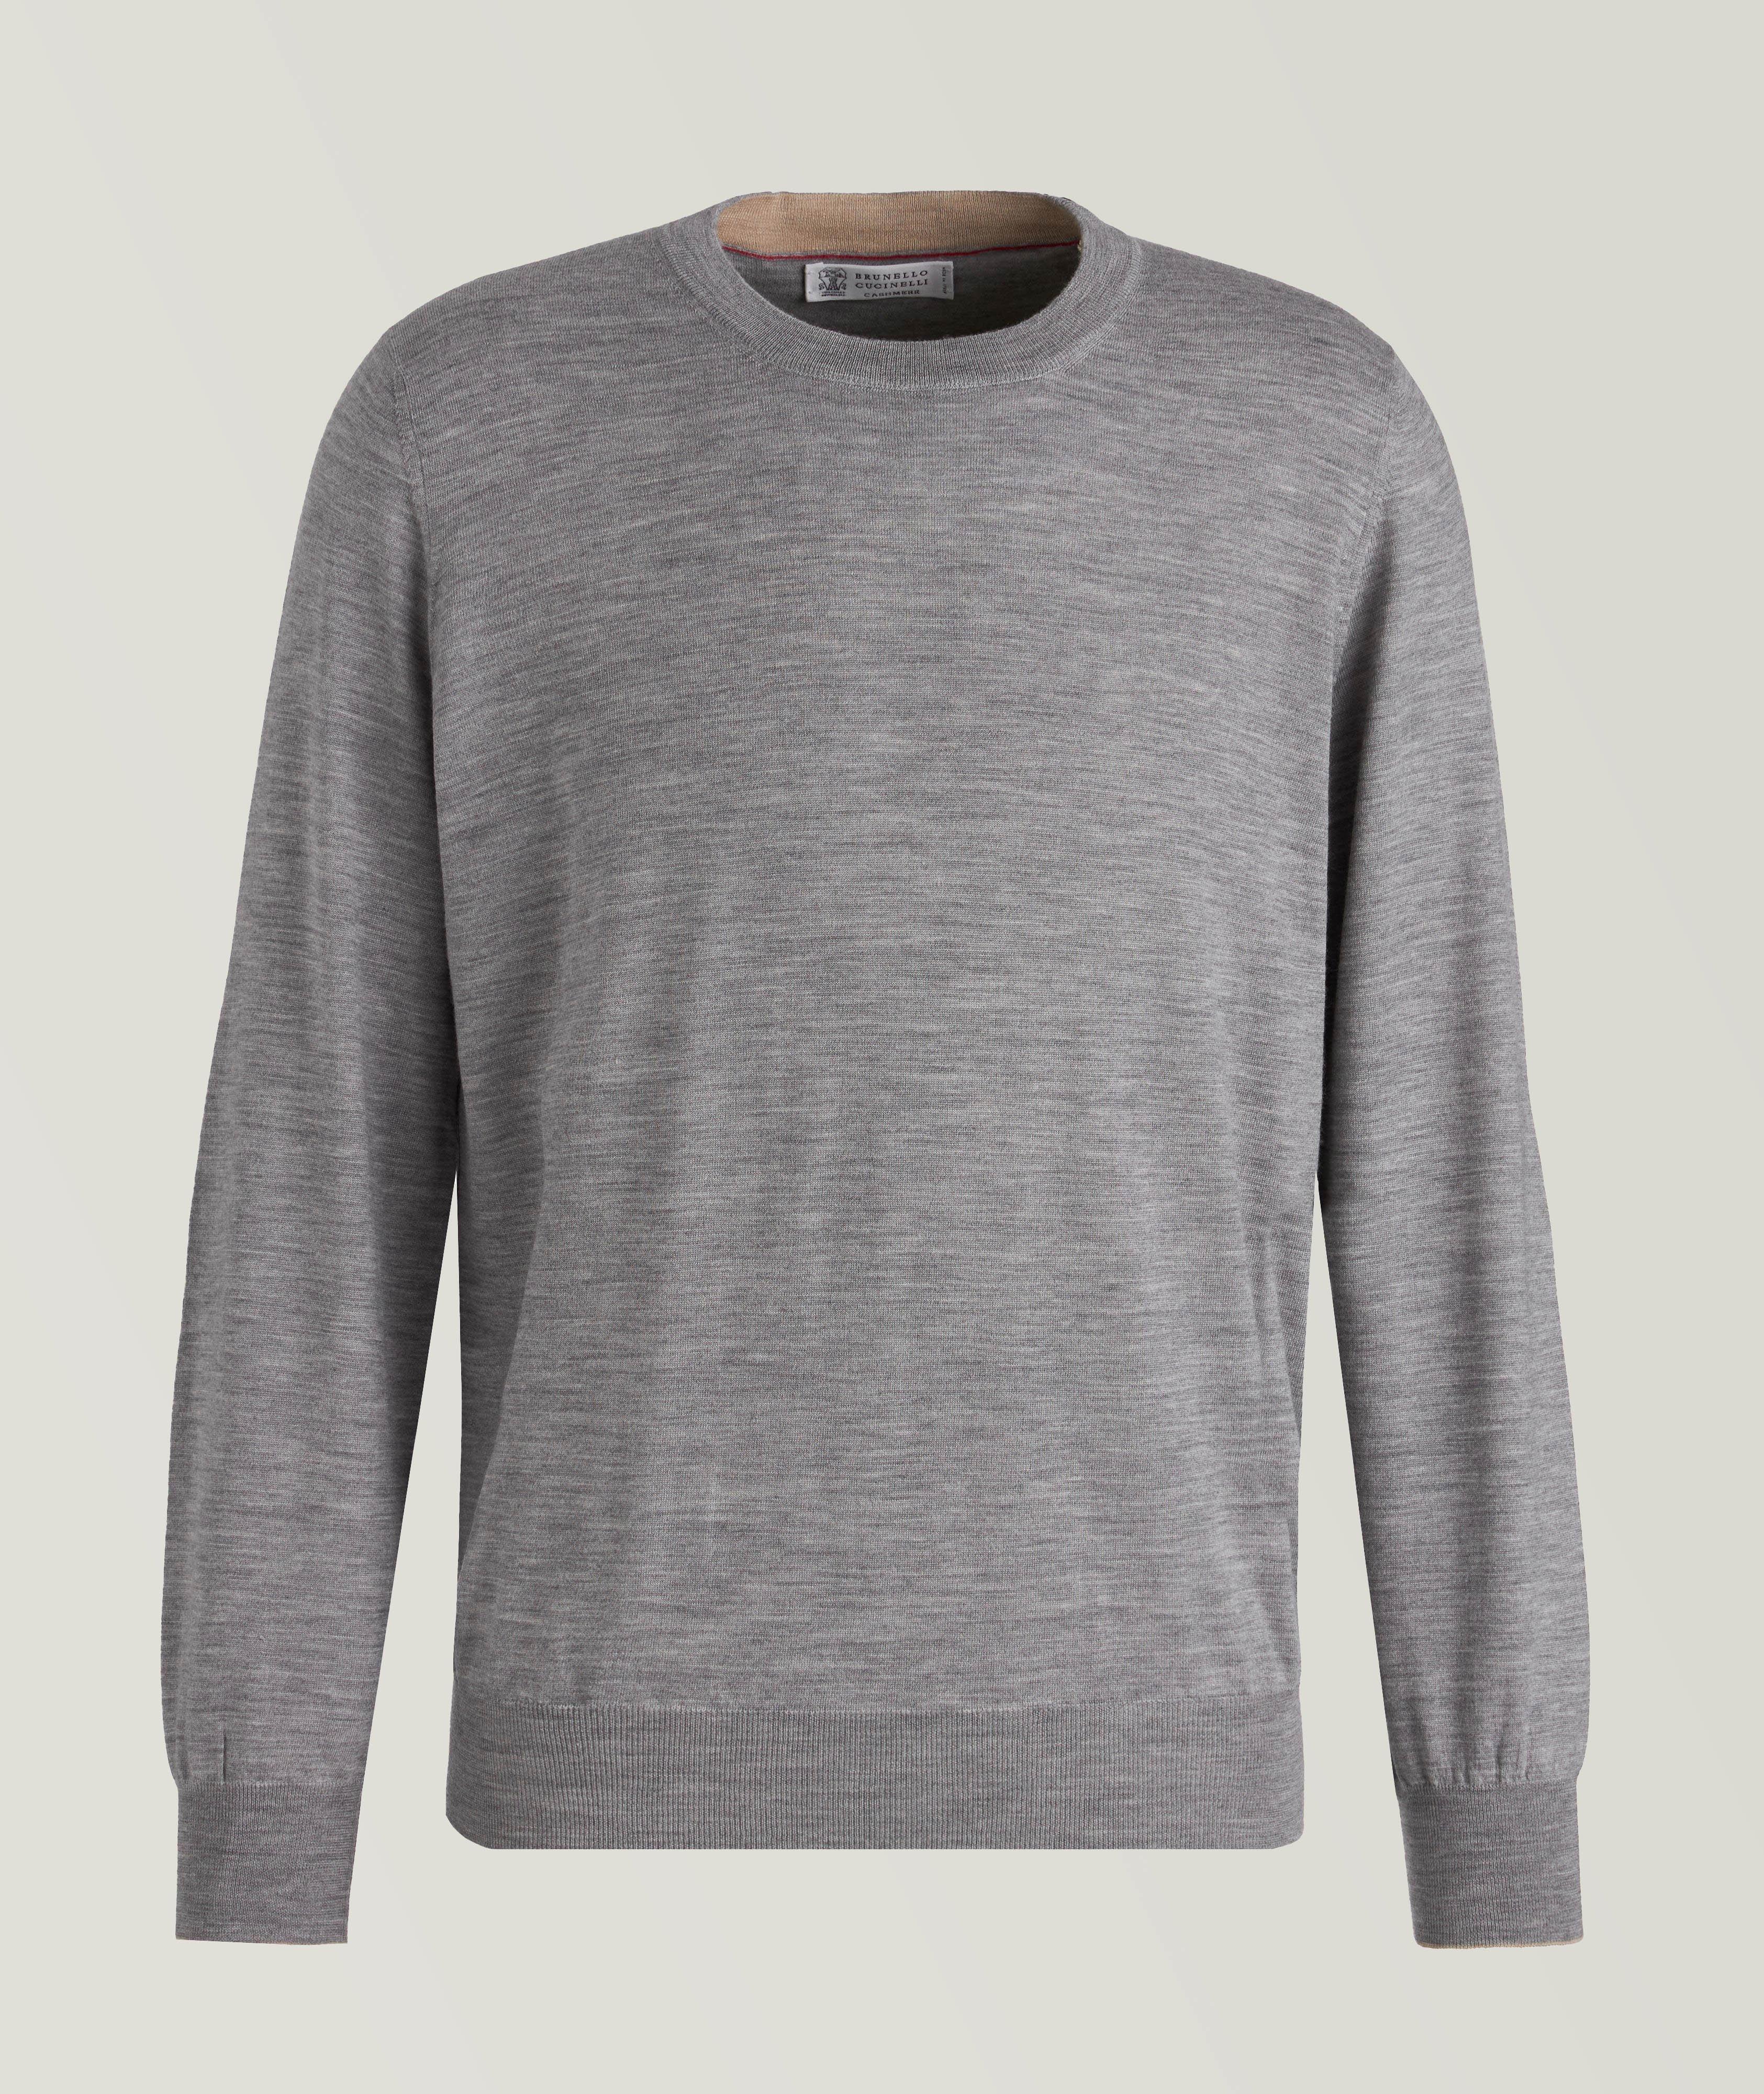 Elbow Patch Wool-Cashmere Crewneck Sweater image 0